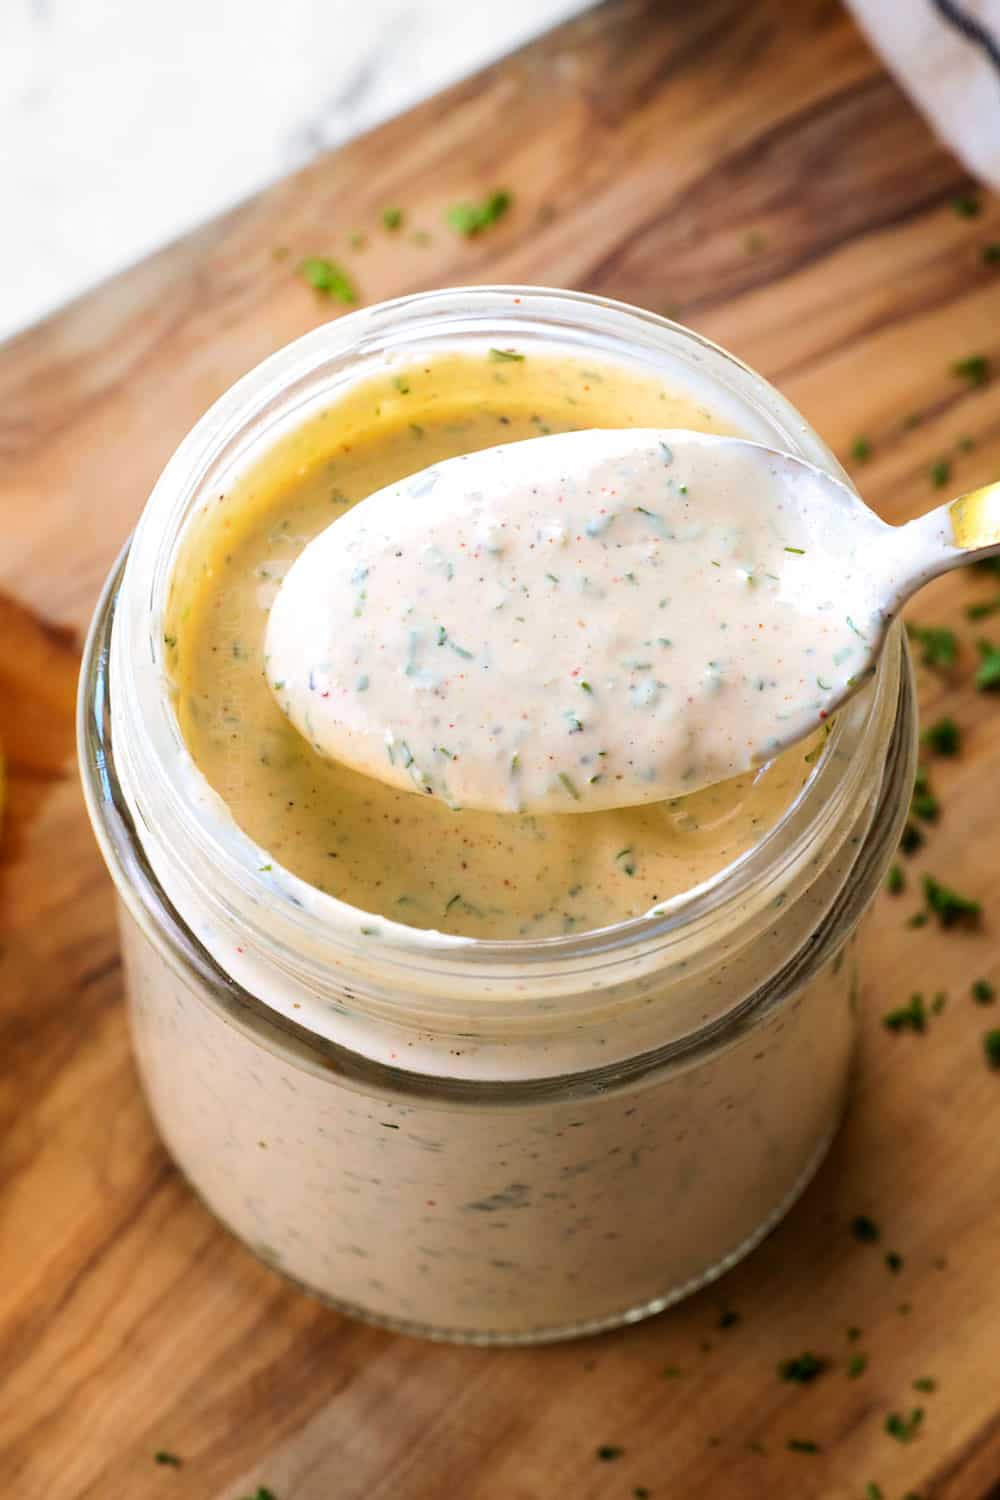 spooning up homemade ranch dressing showing how creamy it is